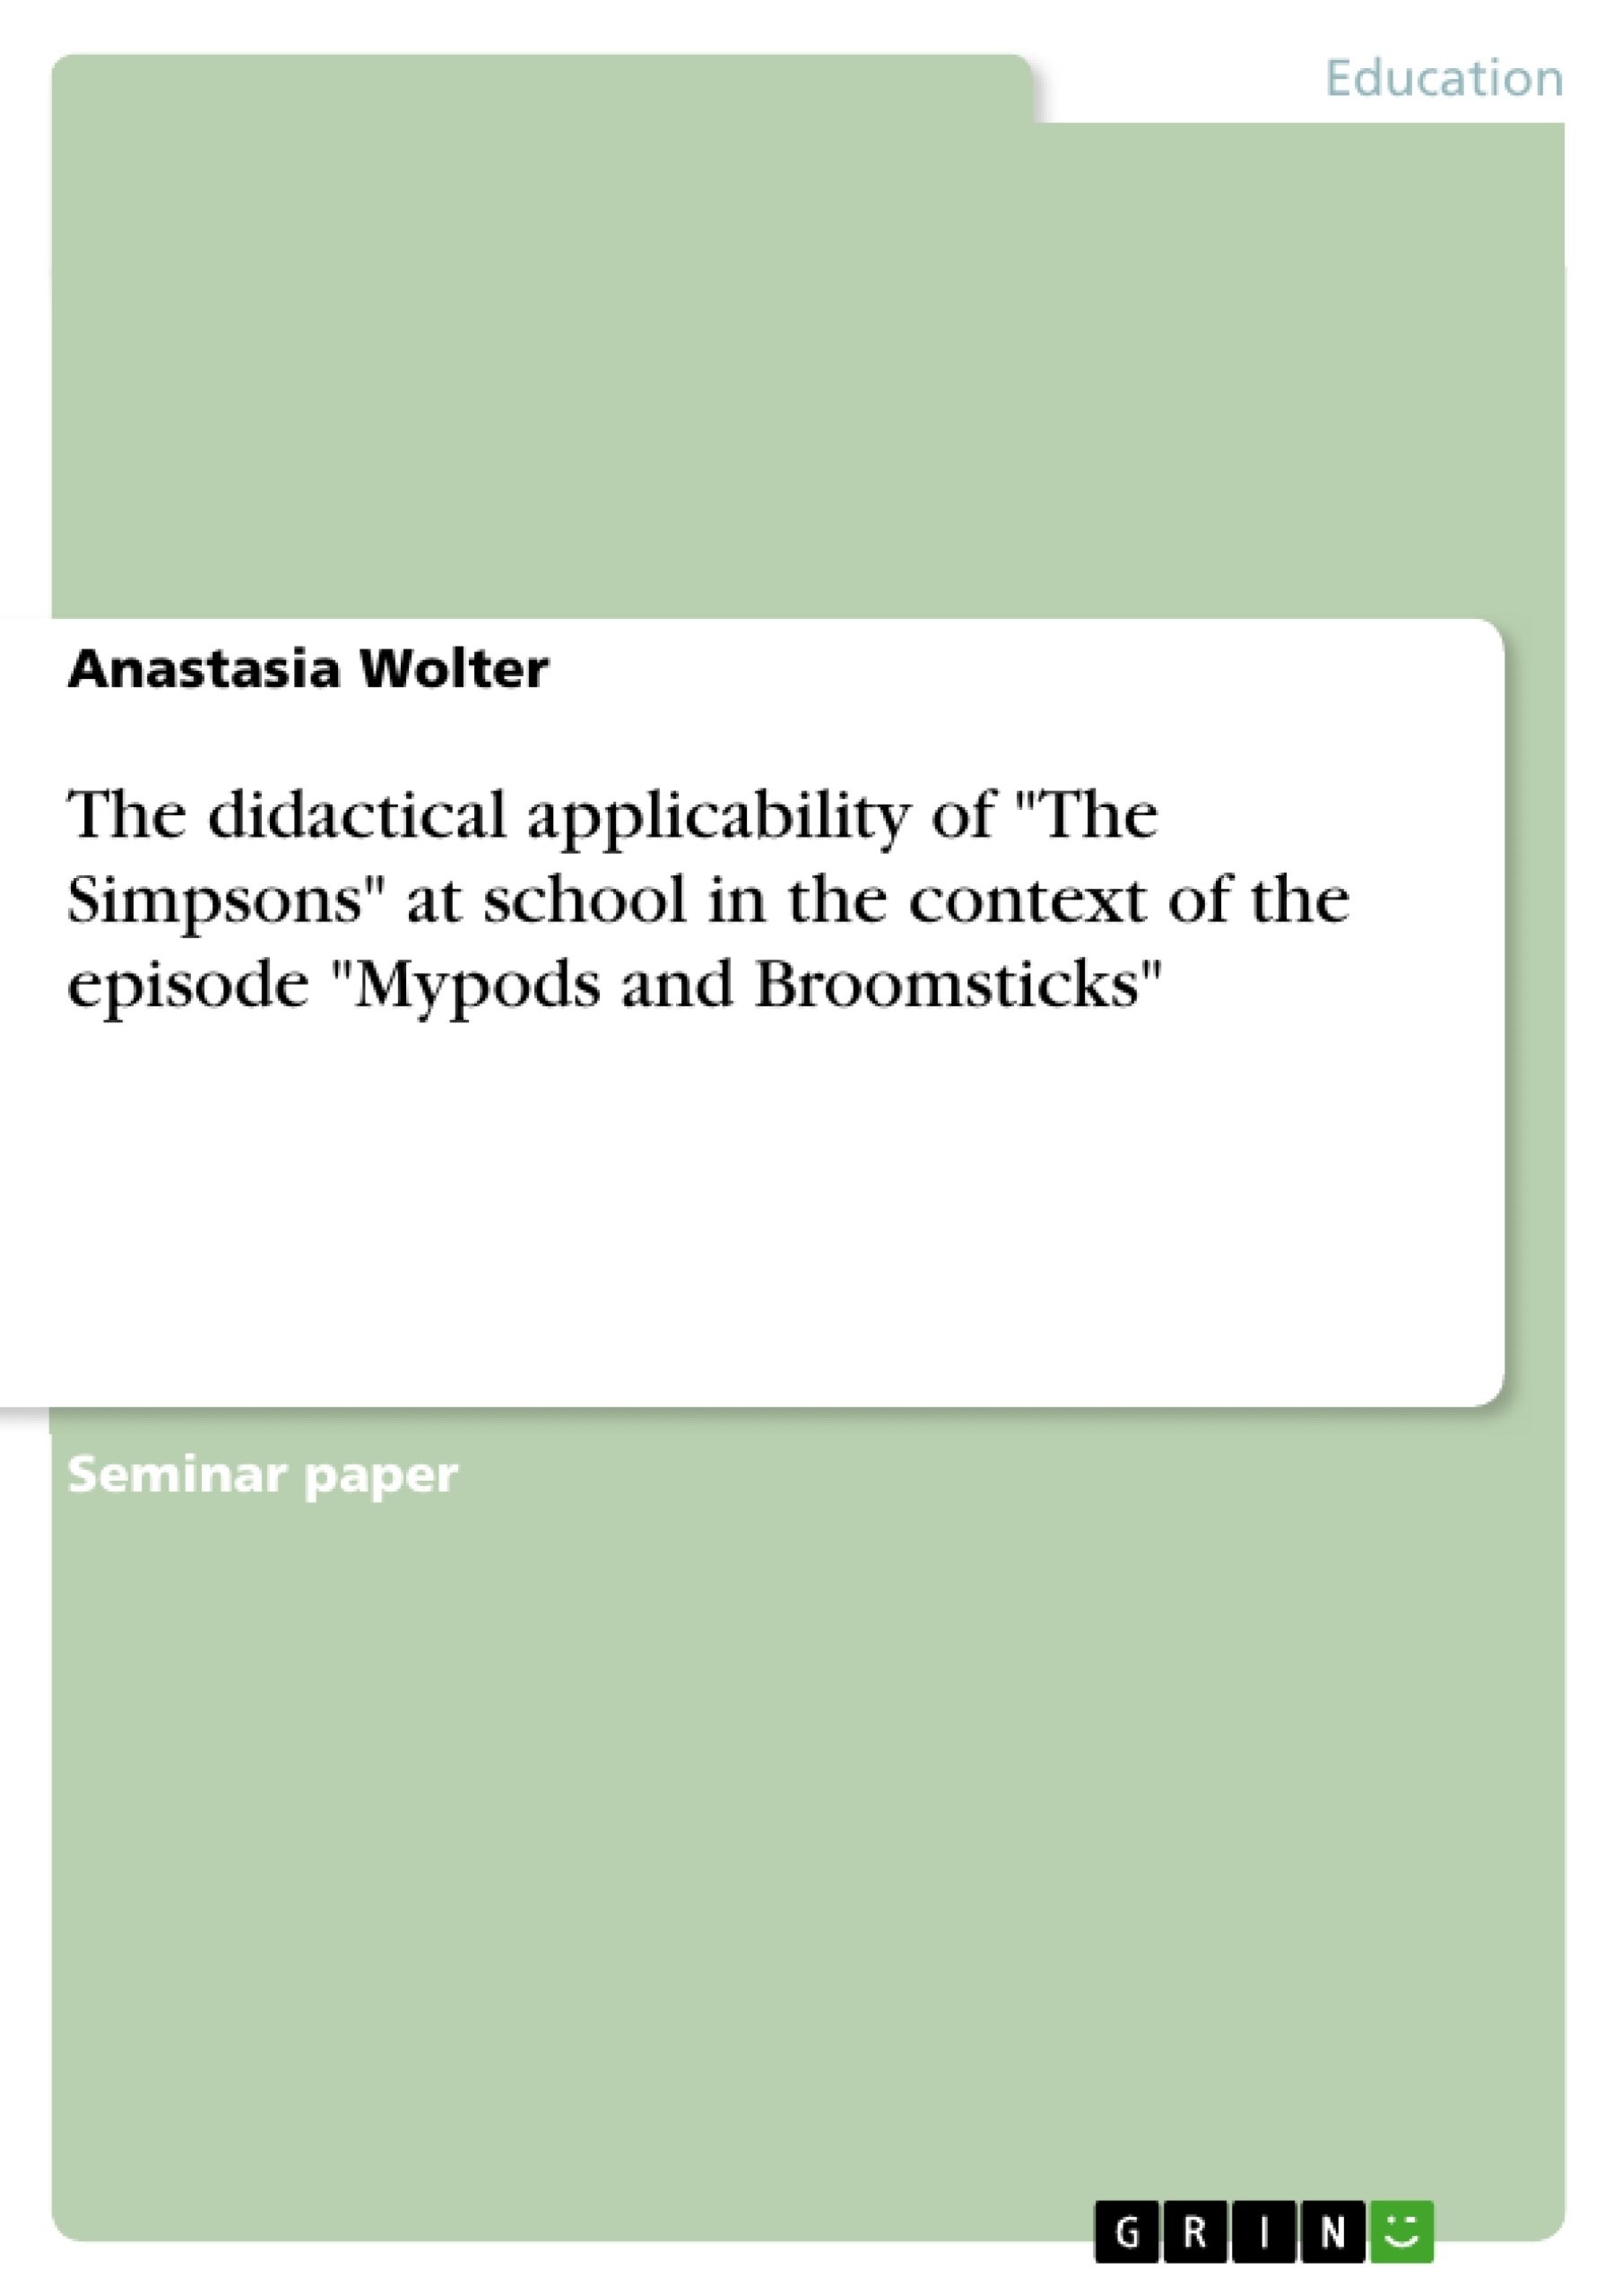 Title: The didactical applicability of "The Simpsons" at school in the context of the episode "Mypods and Broomsticks"